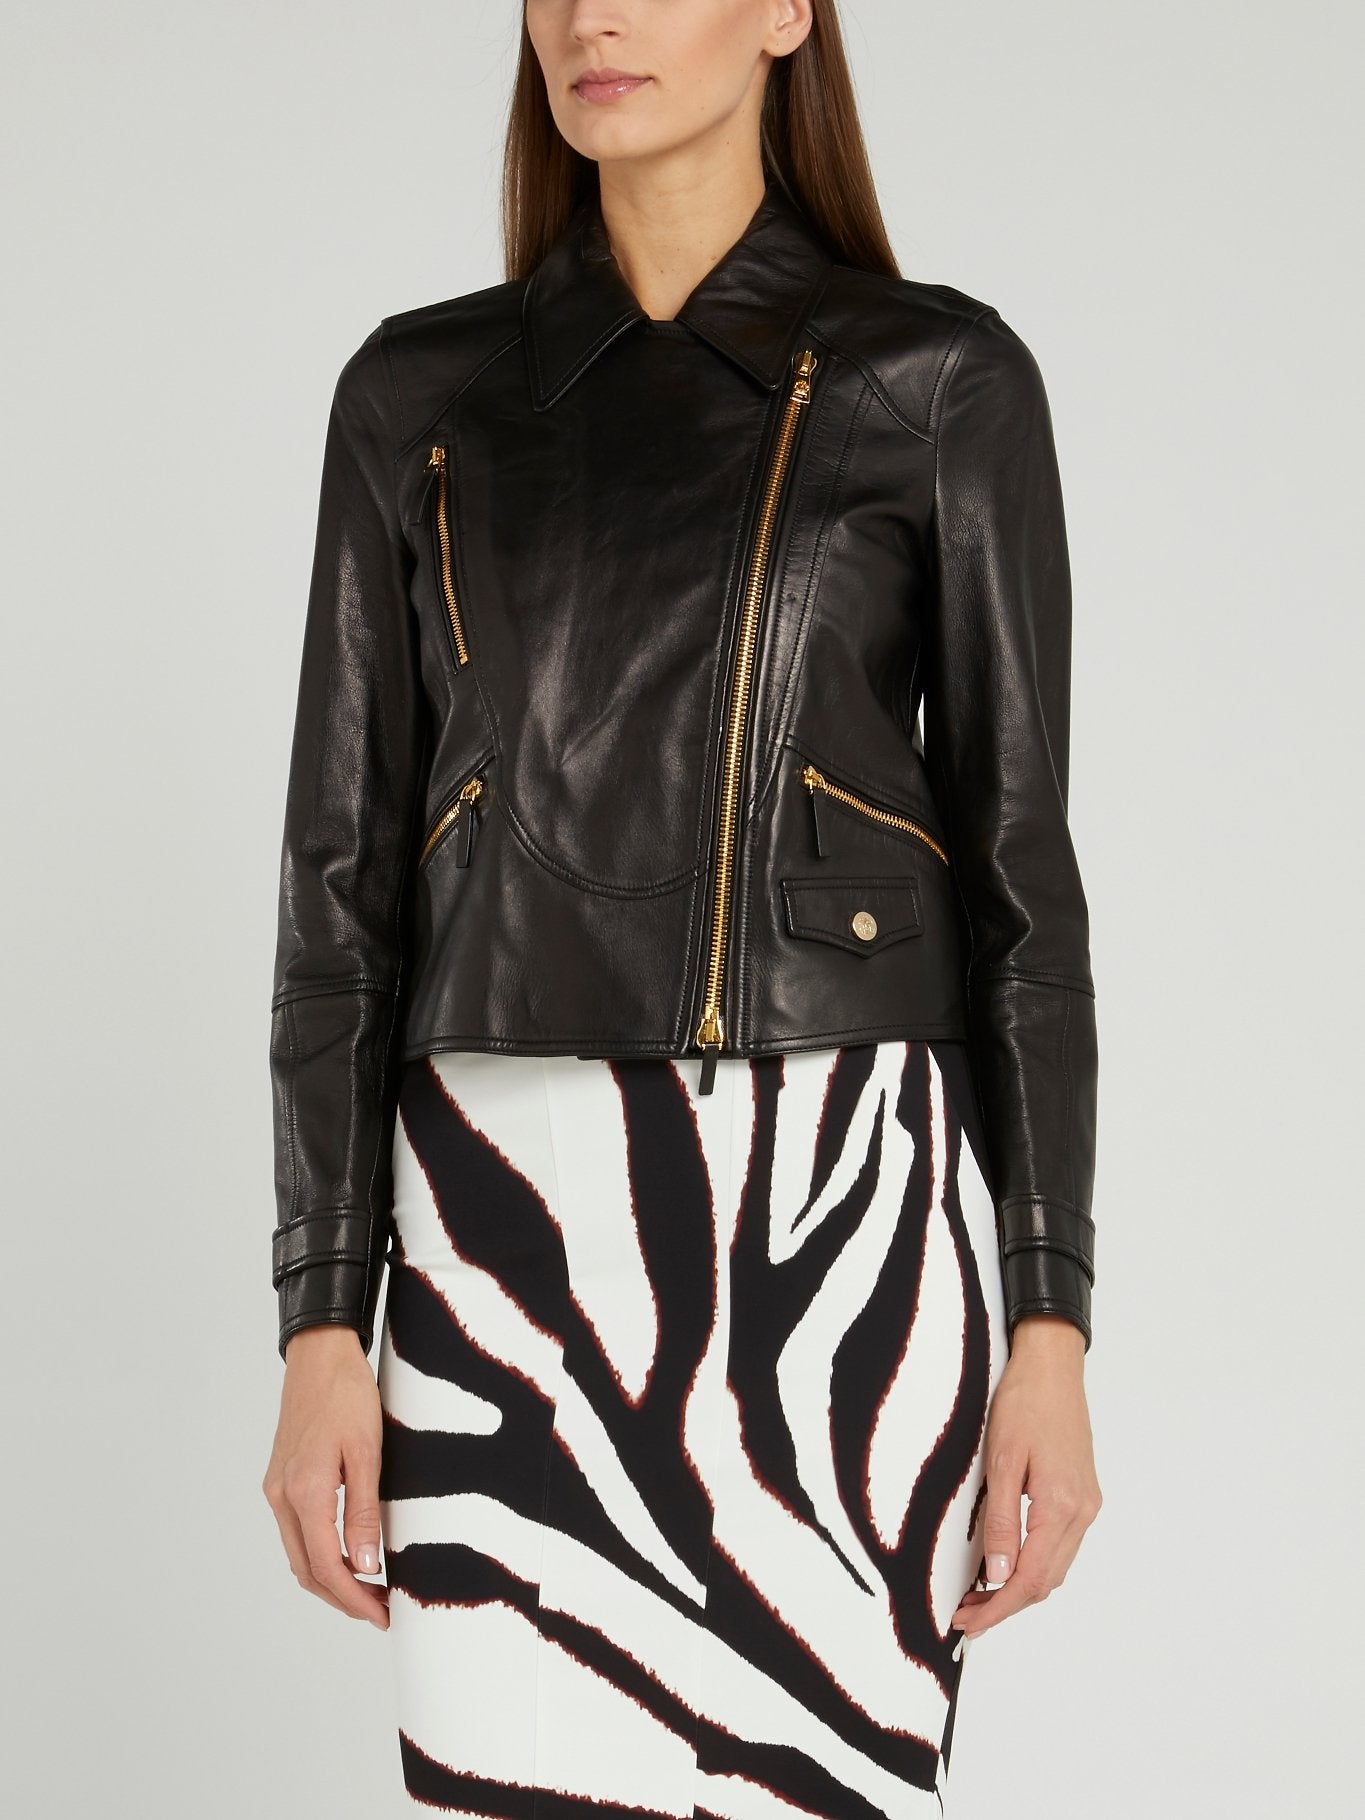 Black Wide-Collared Leather Jacket